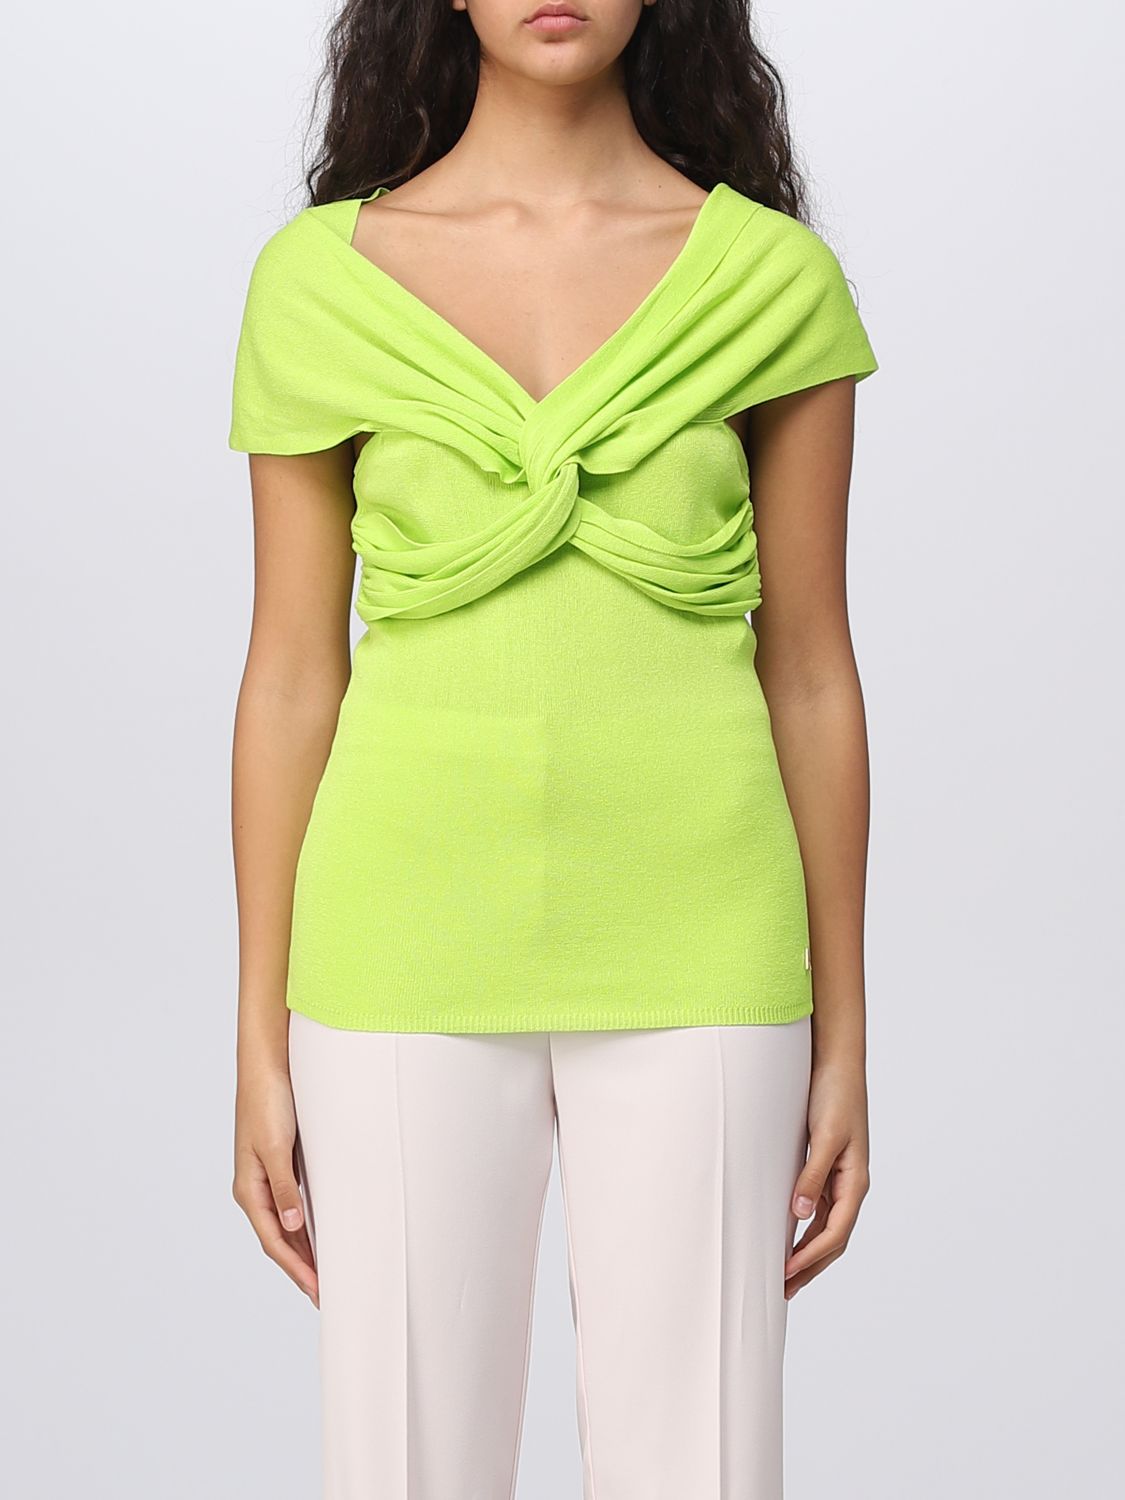 Actitude Twinset Top  Woman Colour Lime